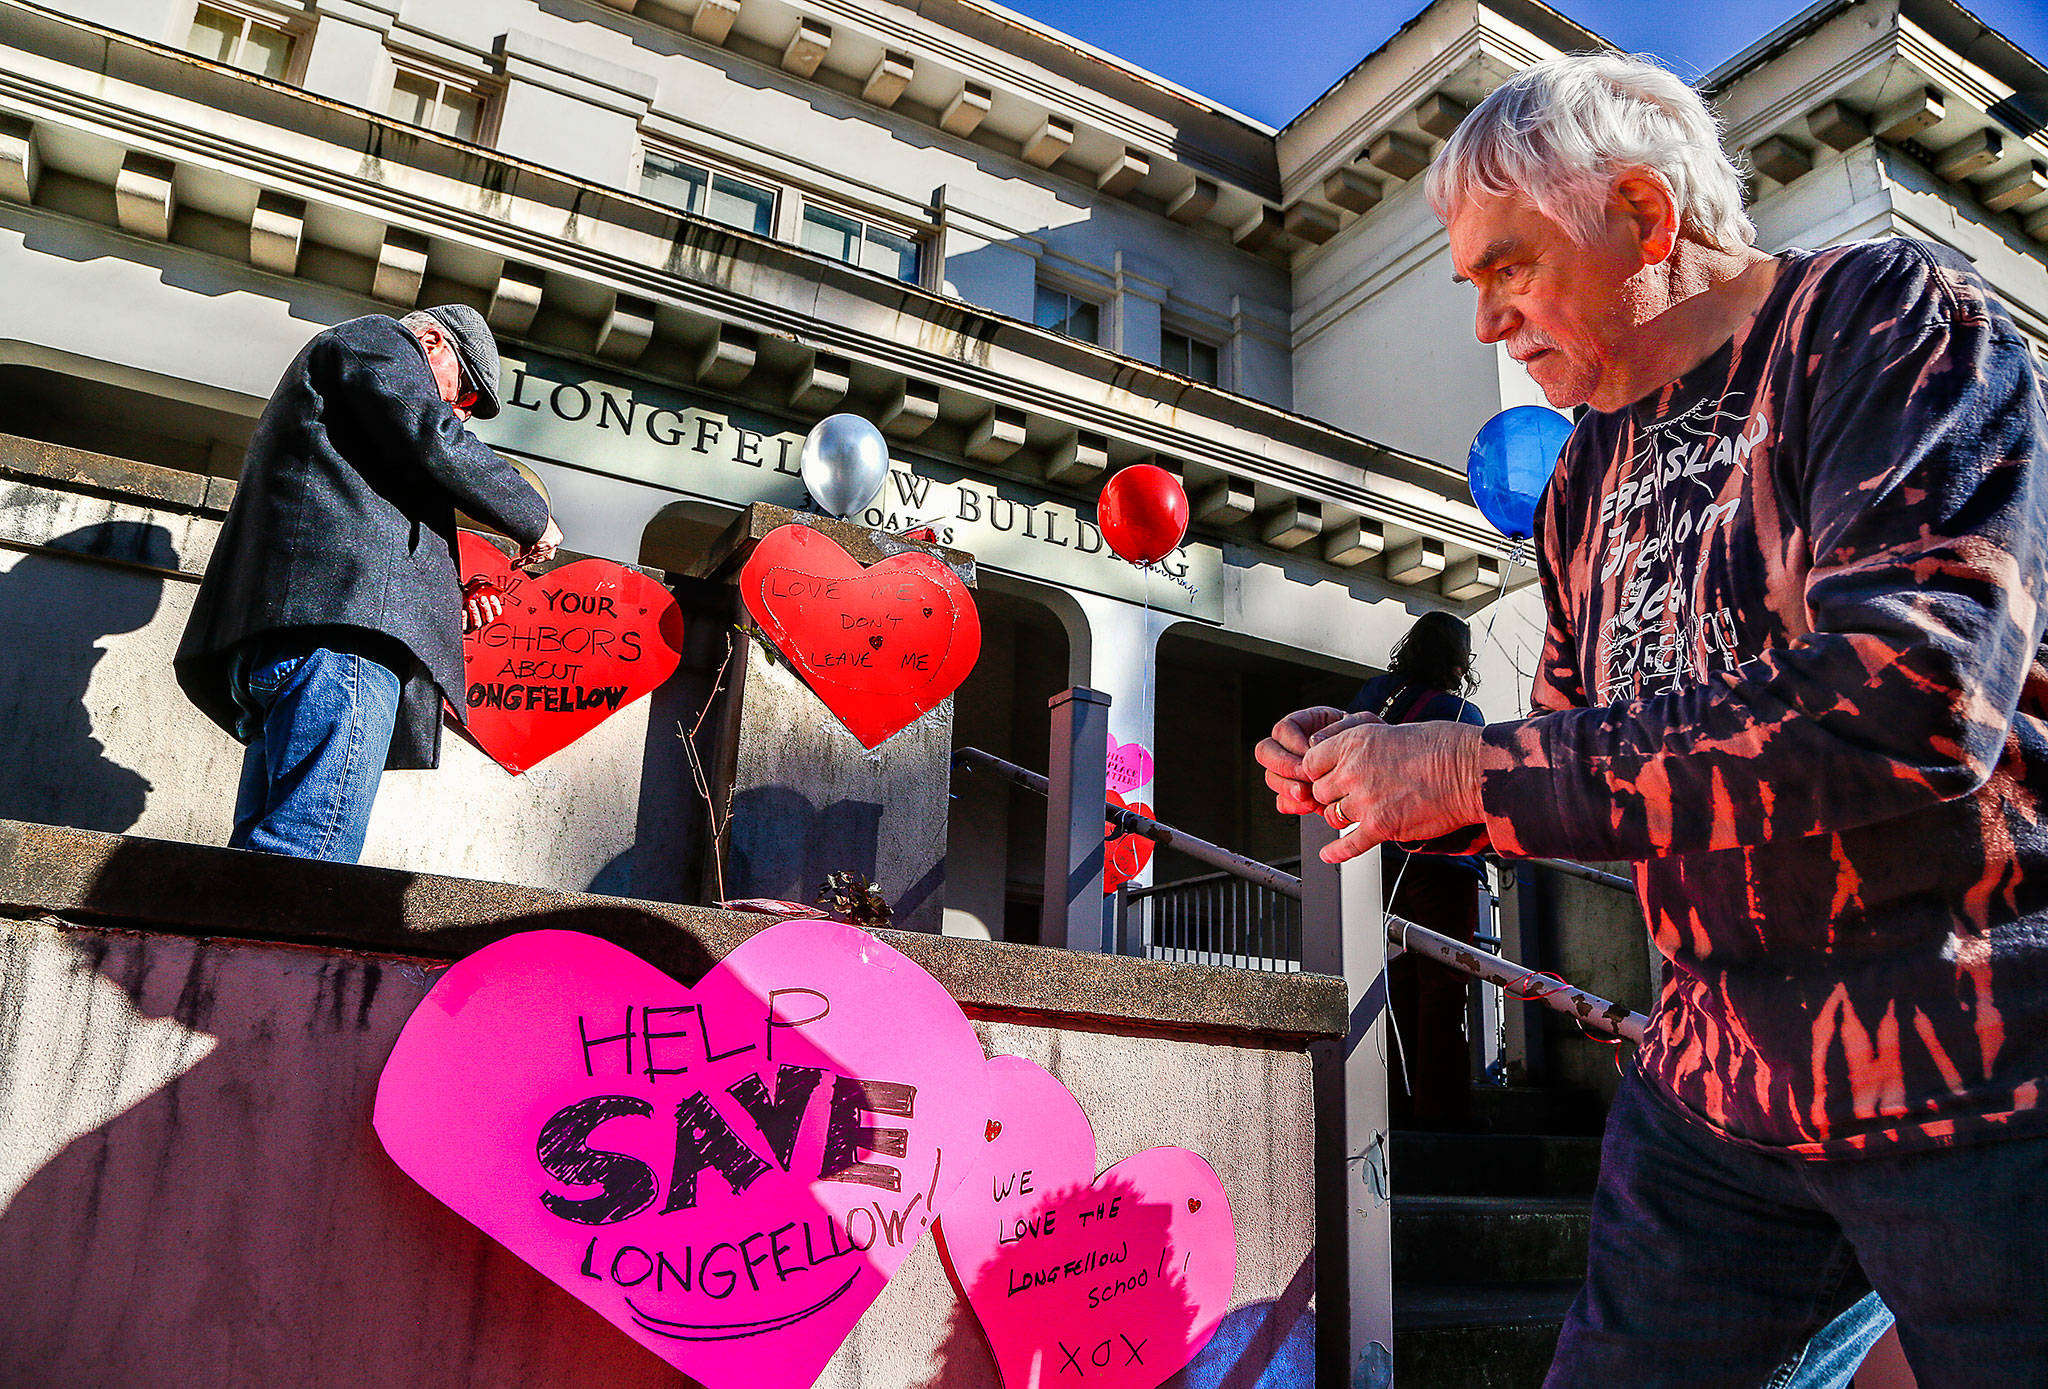 photos by Dan Bates / The Herald                                Local preservationists Paul Popelka (right) and Patrick Hall attach paper hearts with messages about the former Longfellow Scholl in Everett o Friday. They are “heart-bombing” the 108-year-old building to raise awareness of plans to demolish it for parking.